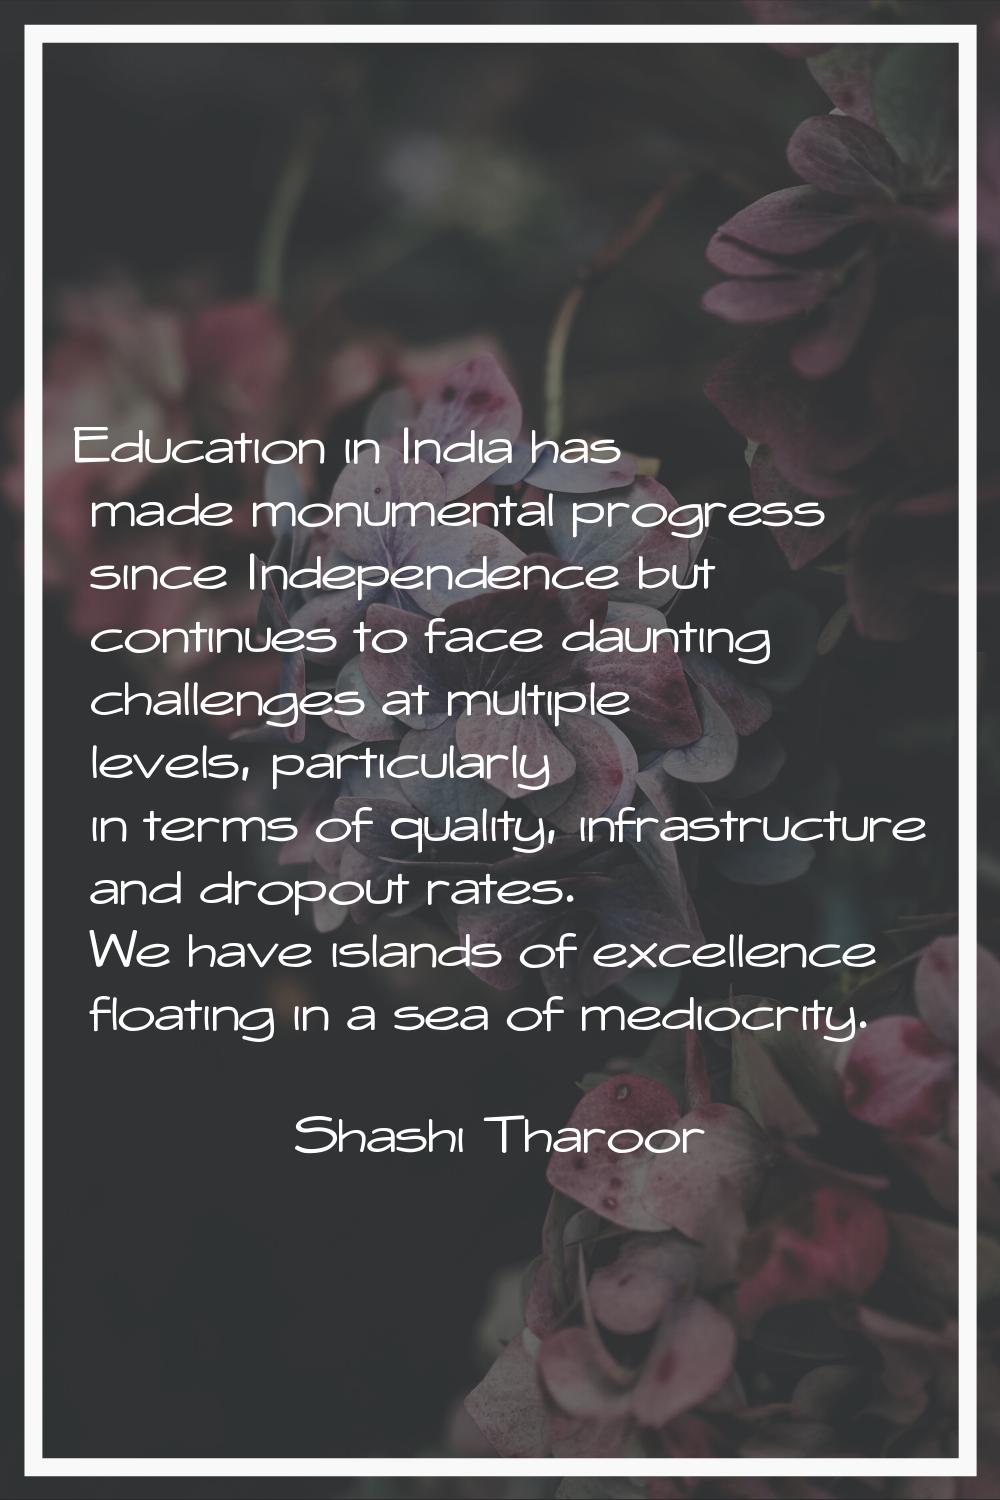 Education in India has made monumental progress since Independence but continues to face daunting c